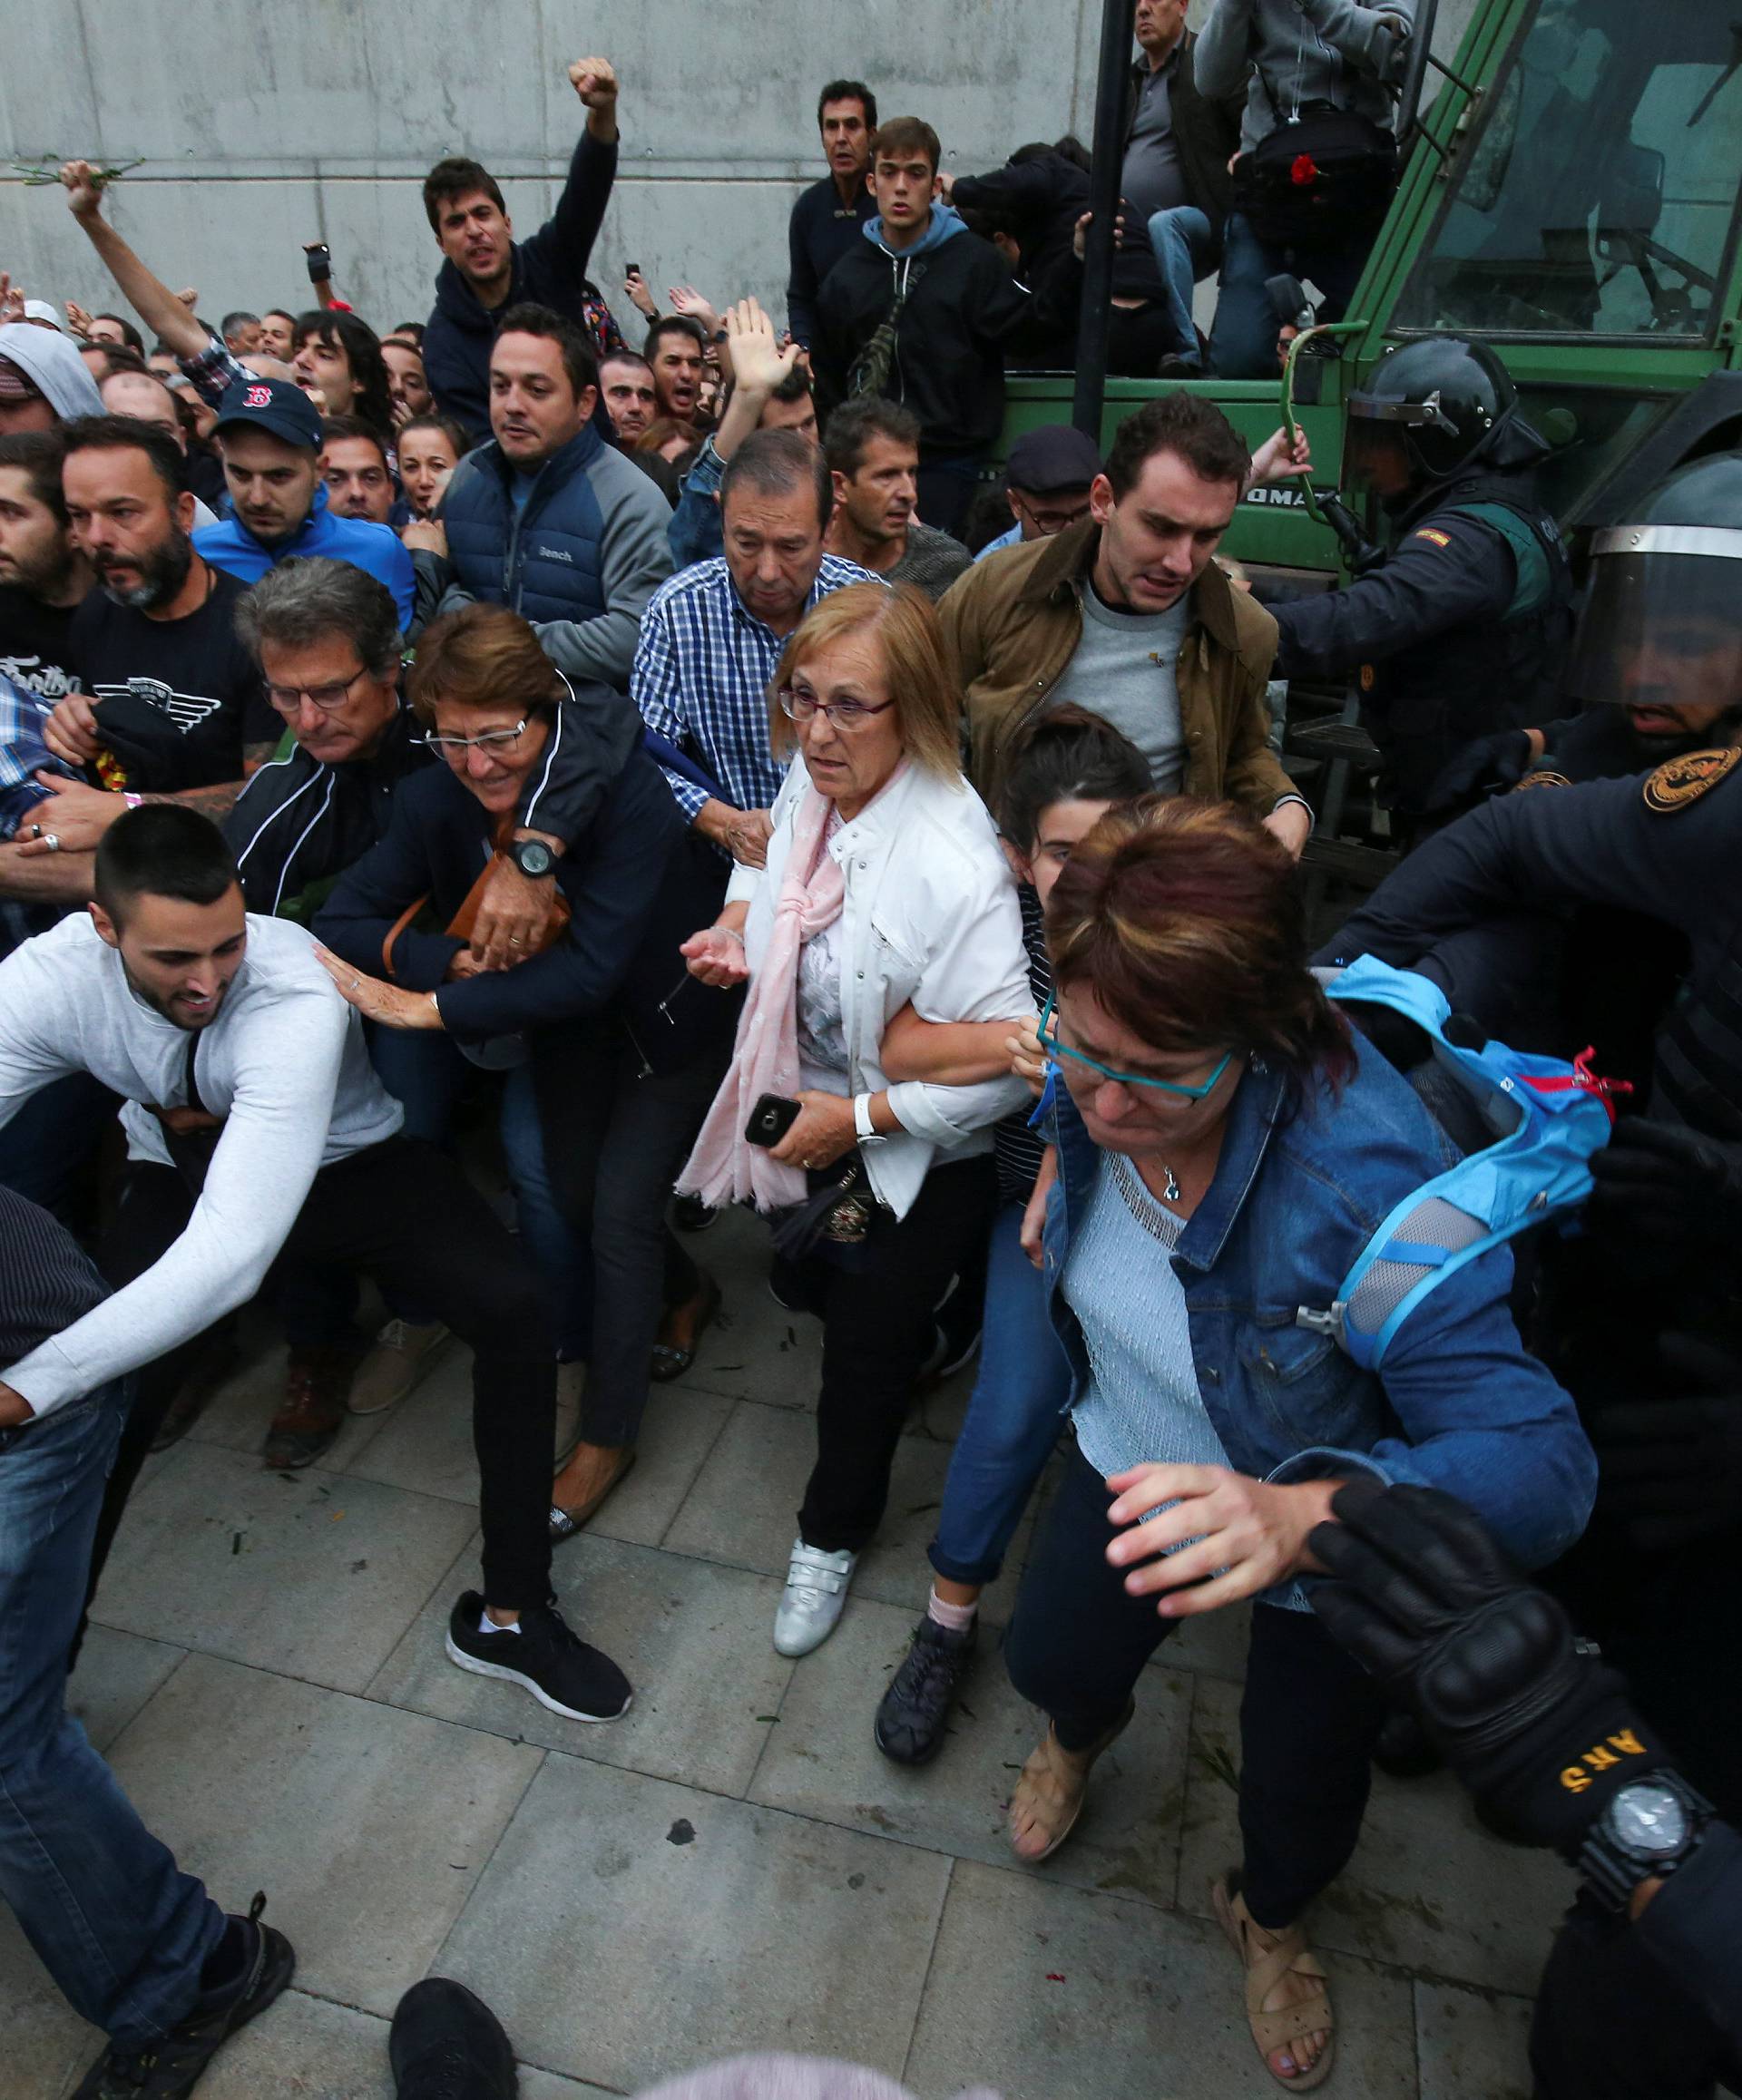 Spanish Civil Guard officers disperse people from the entrance of a polling station for the banned independence referendum in Sant Julia de Ramis